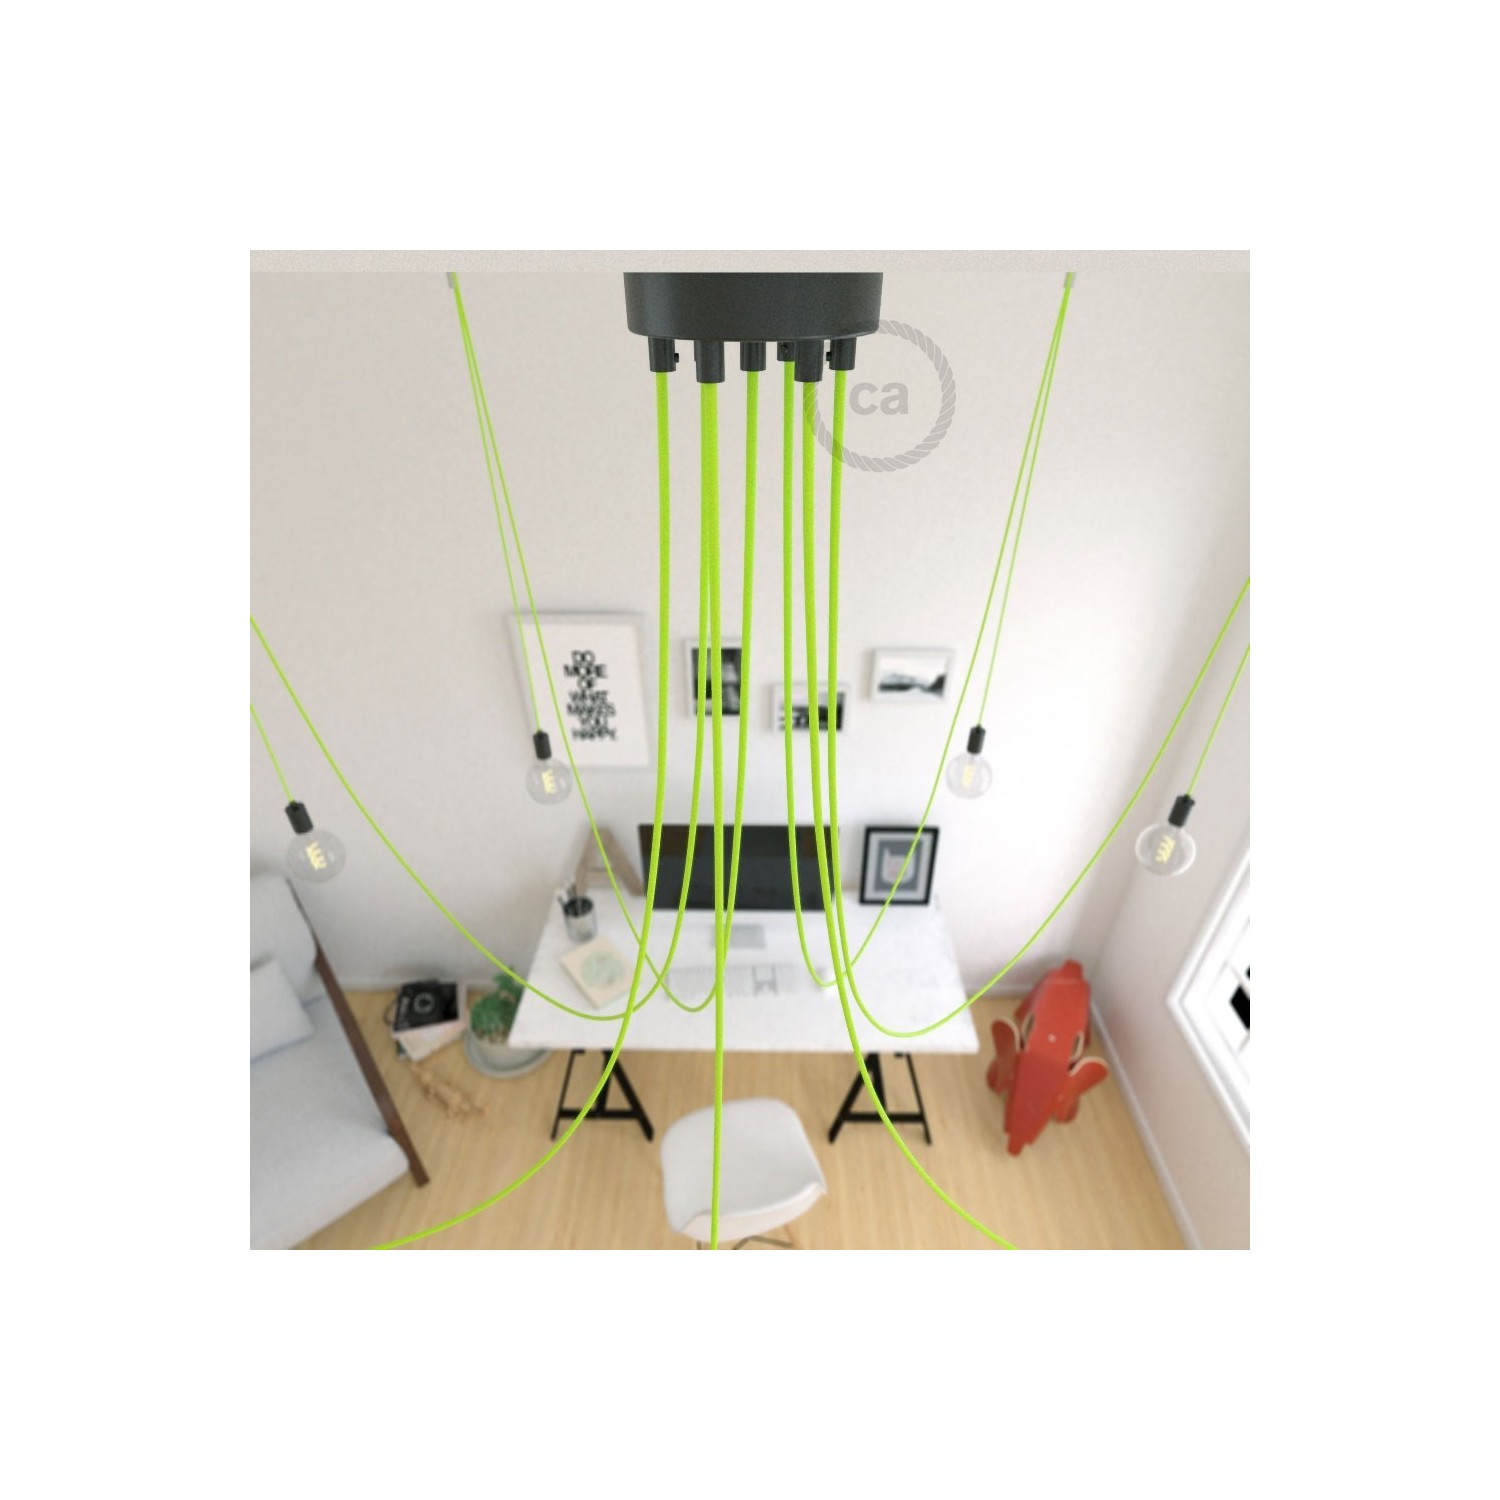 Spider, multiple suspension with 7 pendants, black metal, RF10 Neon Yellow cable, Made in Italy.